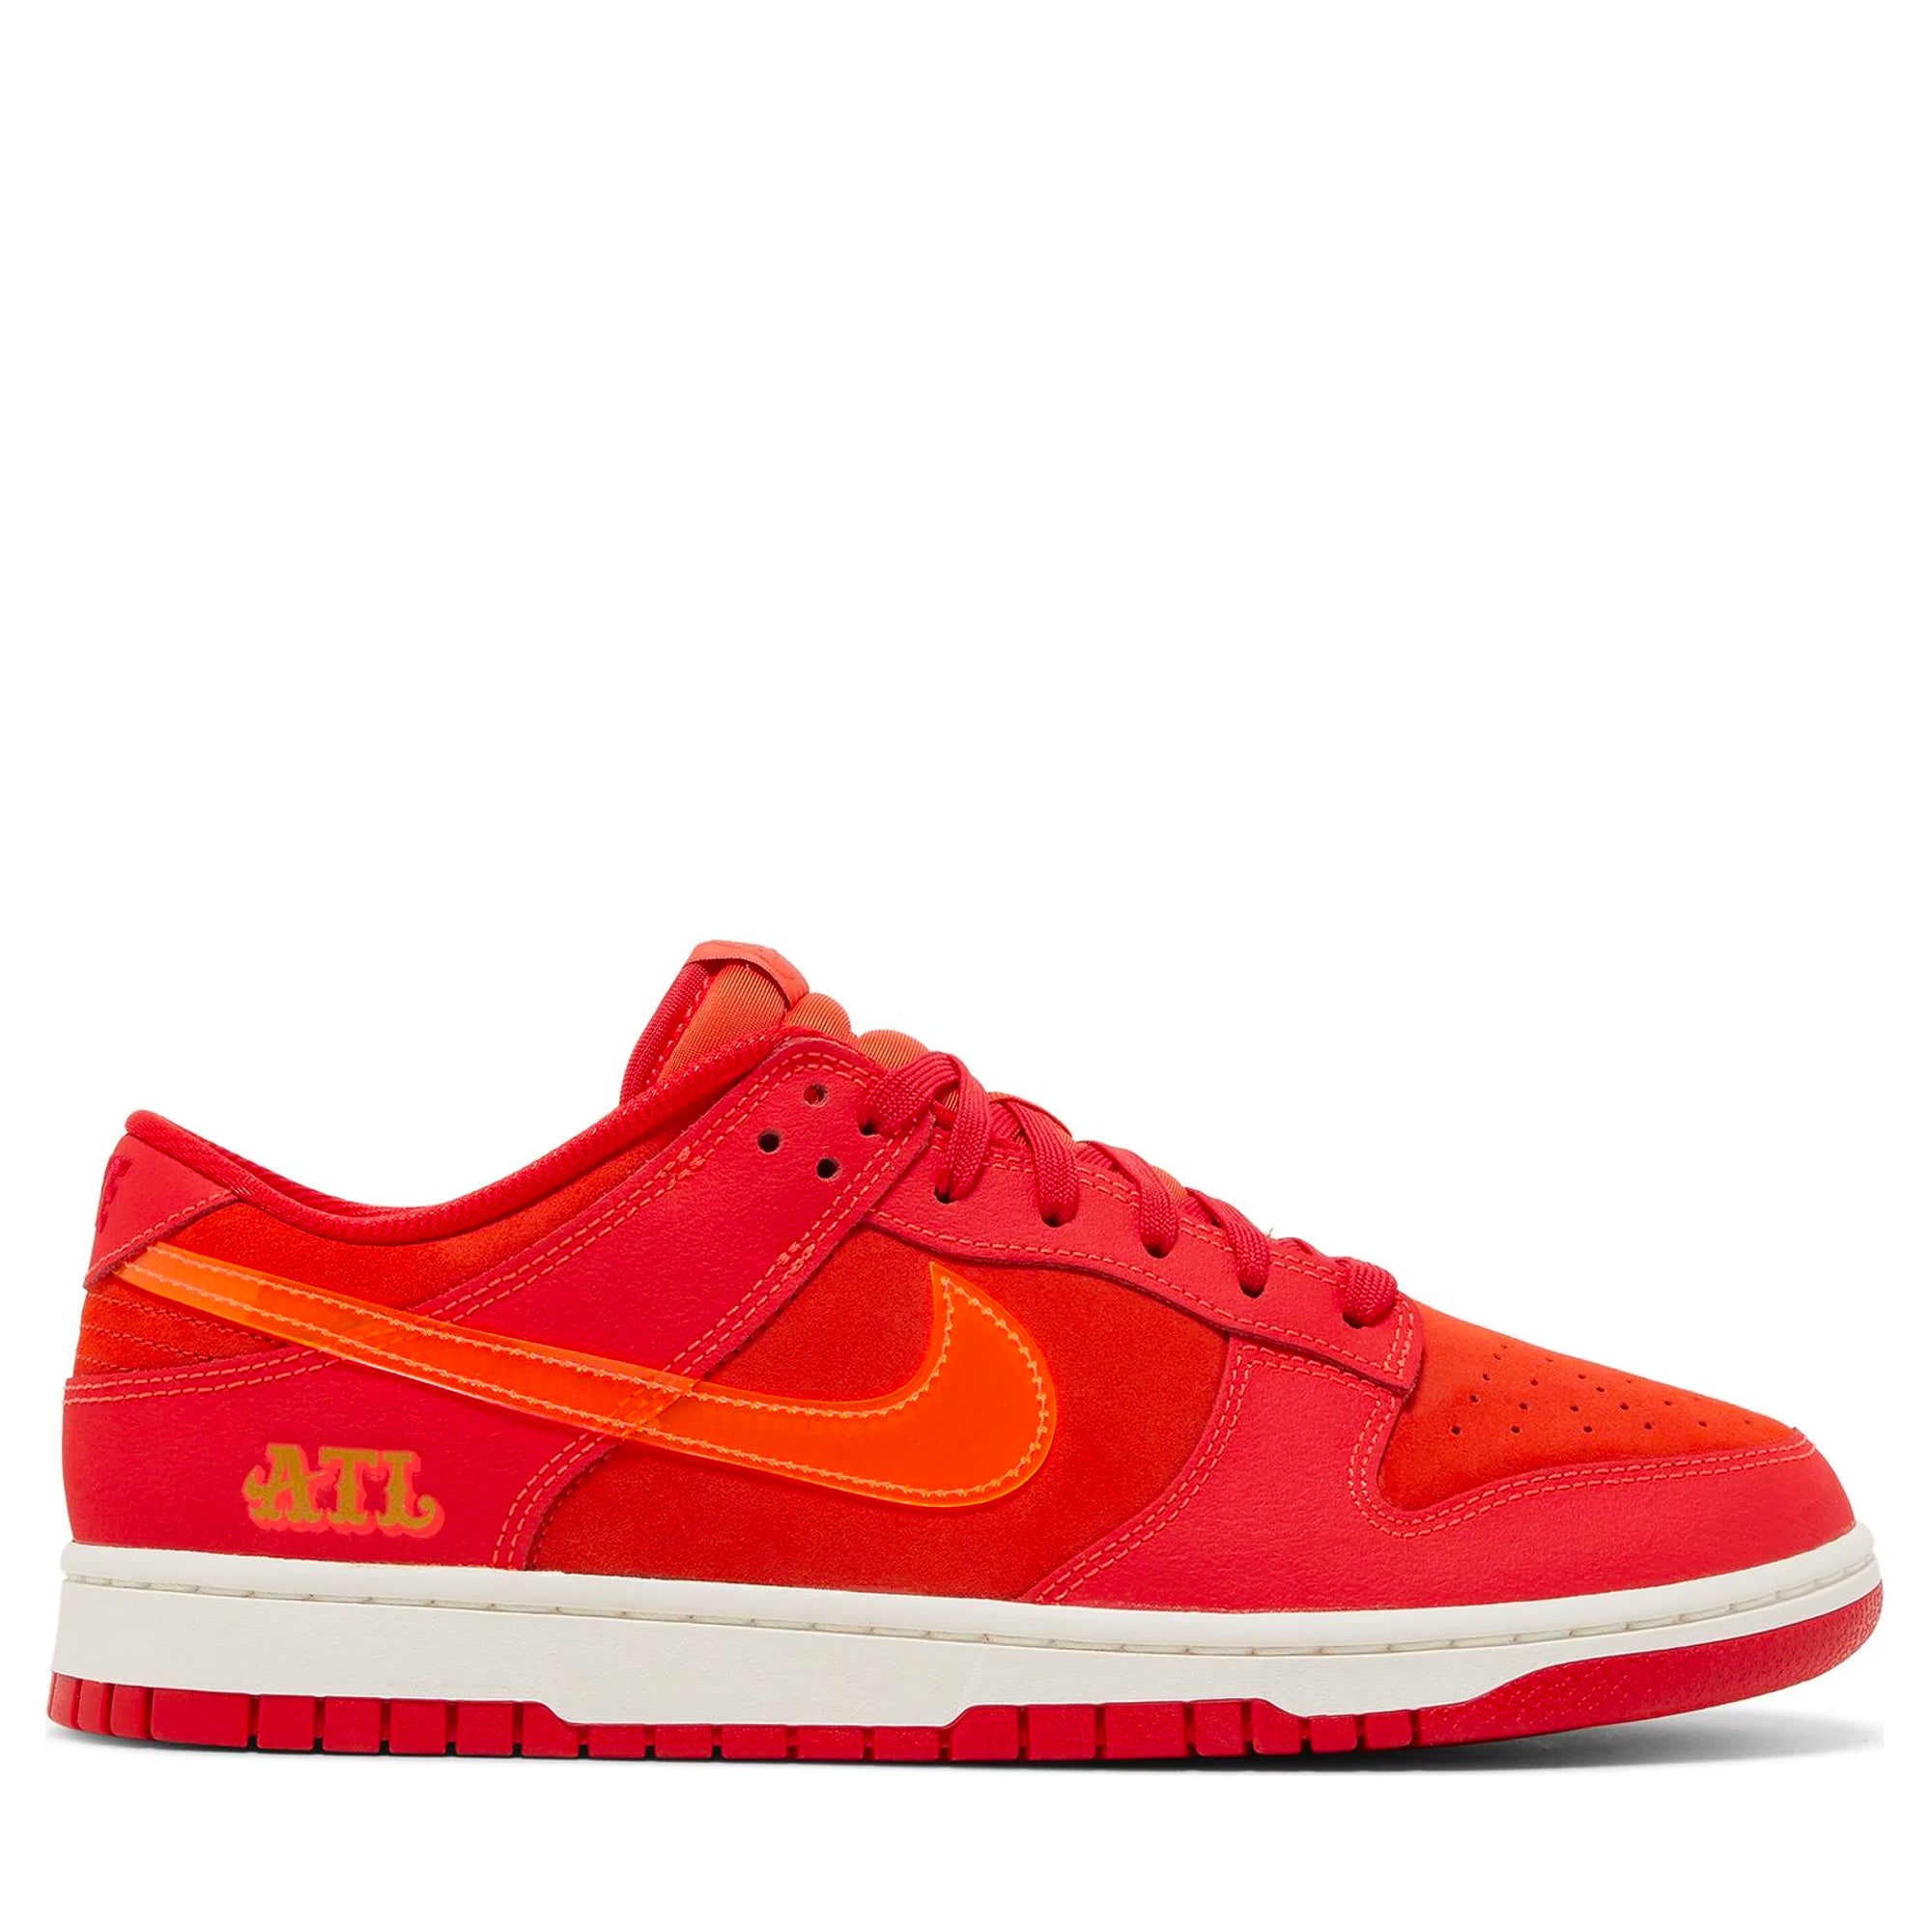 Shop Nike Dunks Sneakers in Canada